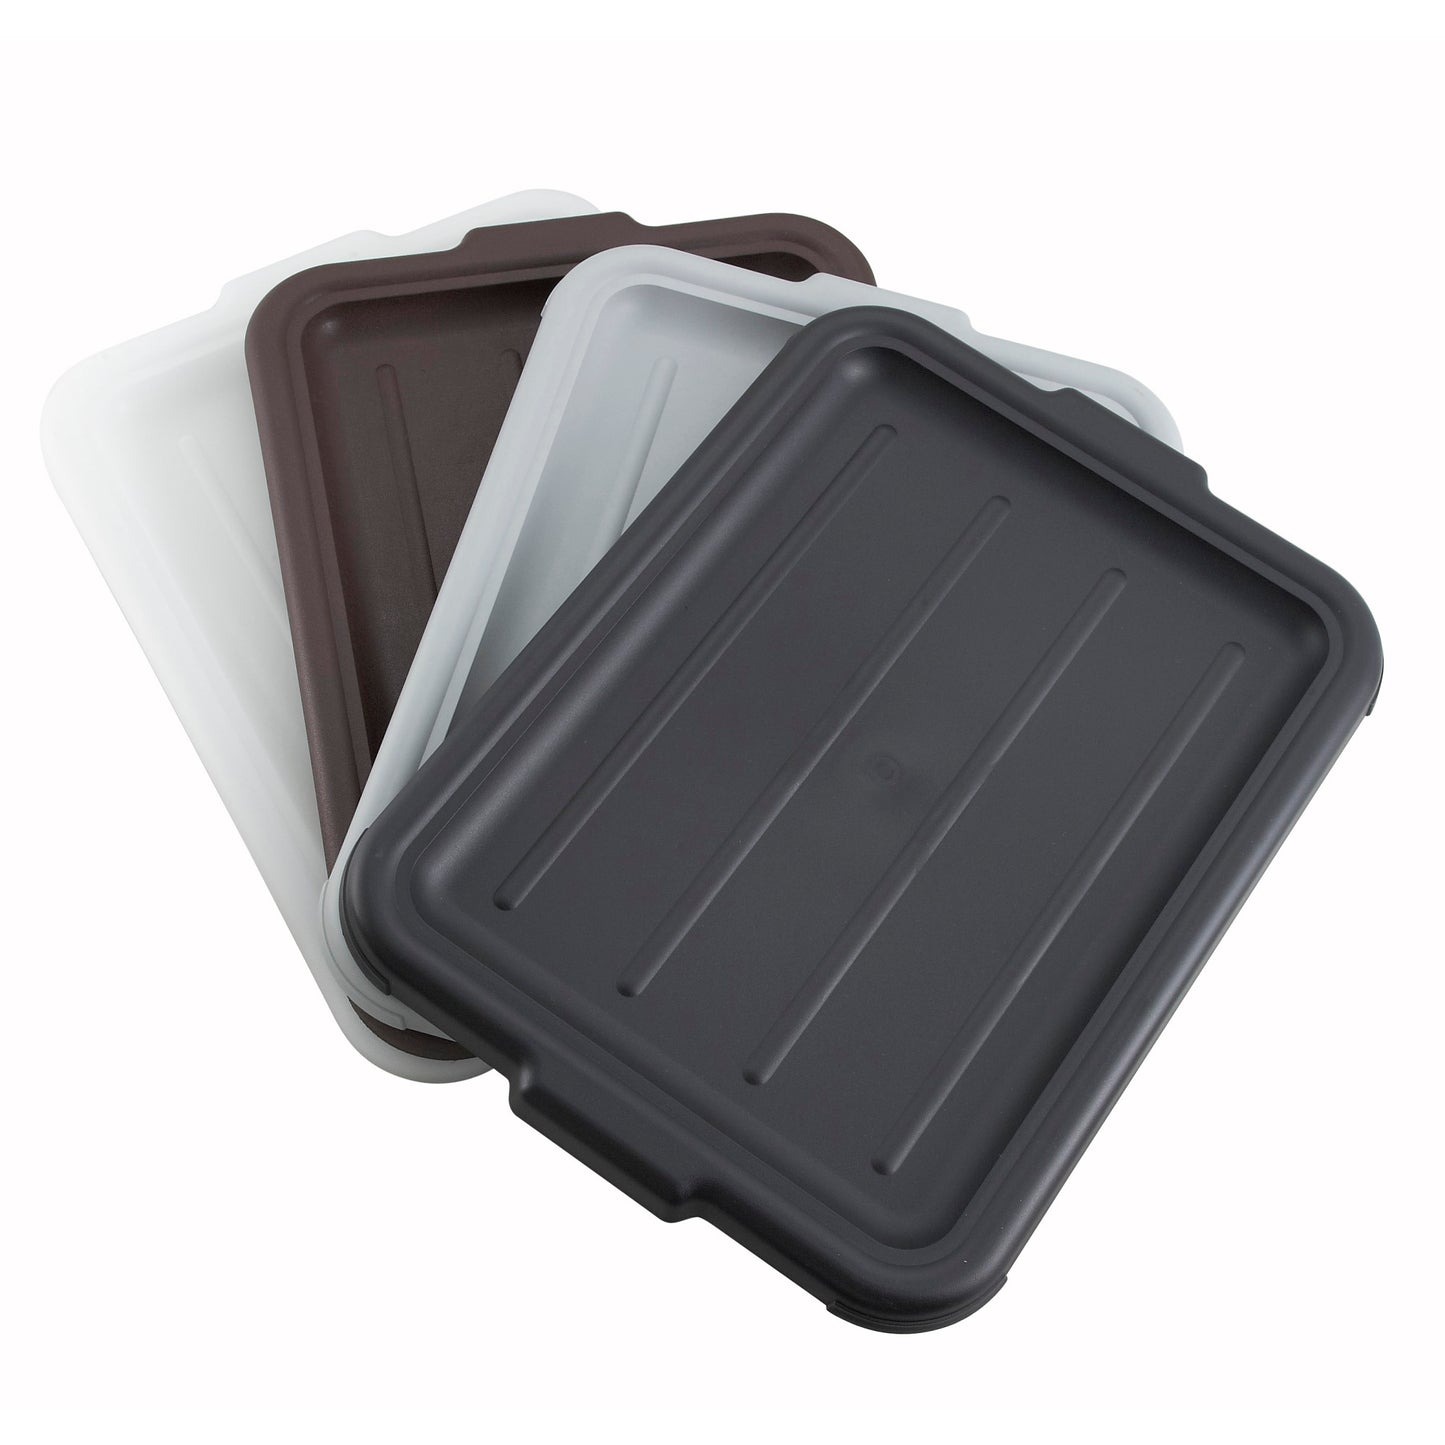 Cover for Standard Dish Boxes - Gray